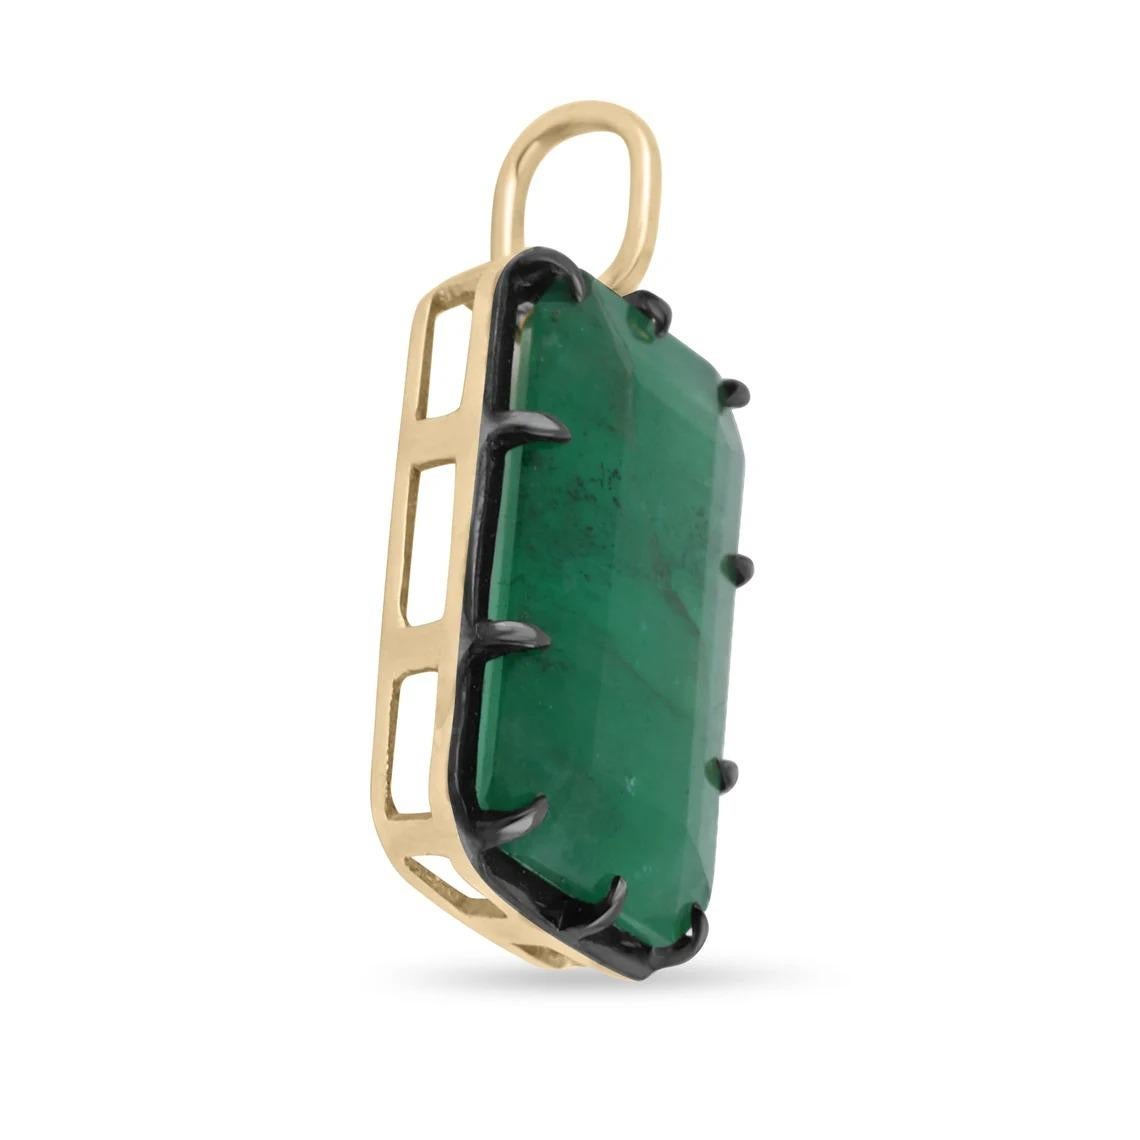 Displayed is a natural emerald Georgian styled solitaire pendant in 14K yellow gold. This gorgeous solitaire pendant carries a full 10.98-carat emerald in a prong setting. Black rhodium highlights the emeralds' bezel and prongs. Fully faceted, this